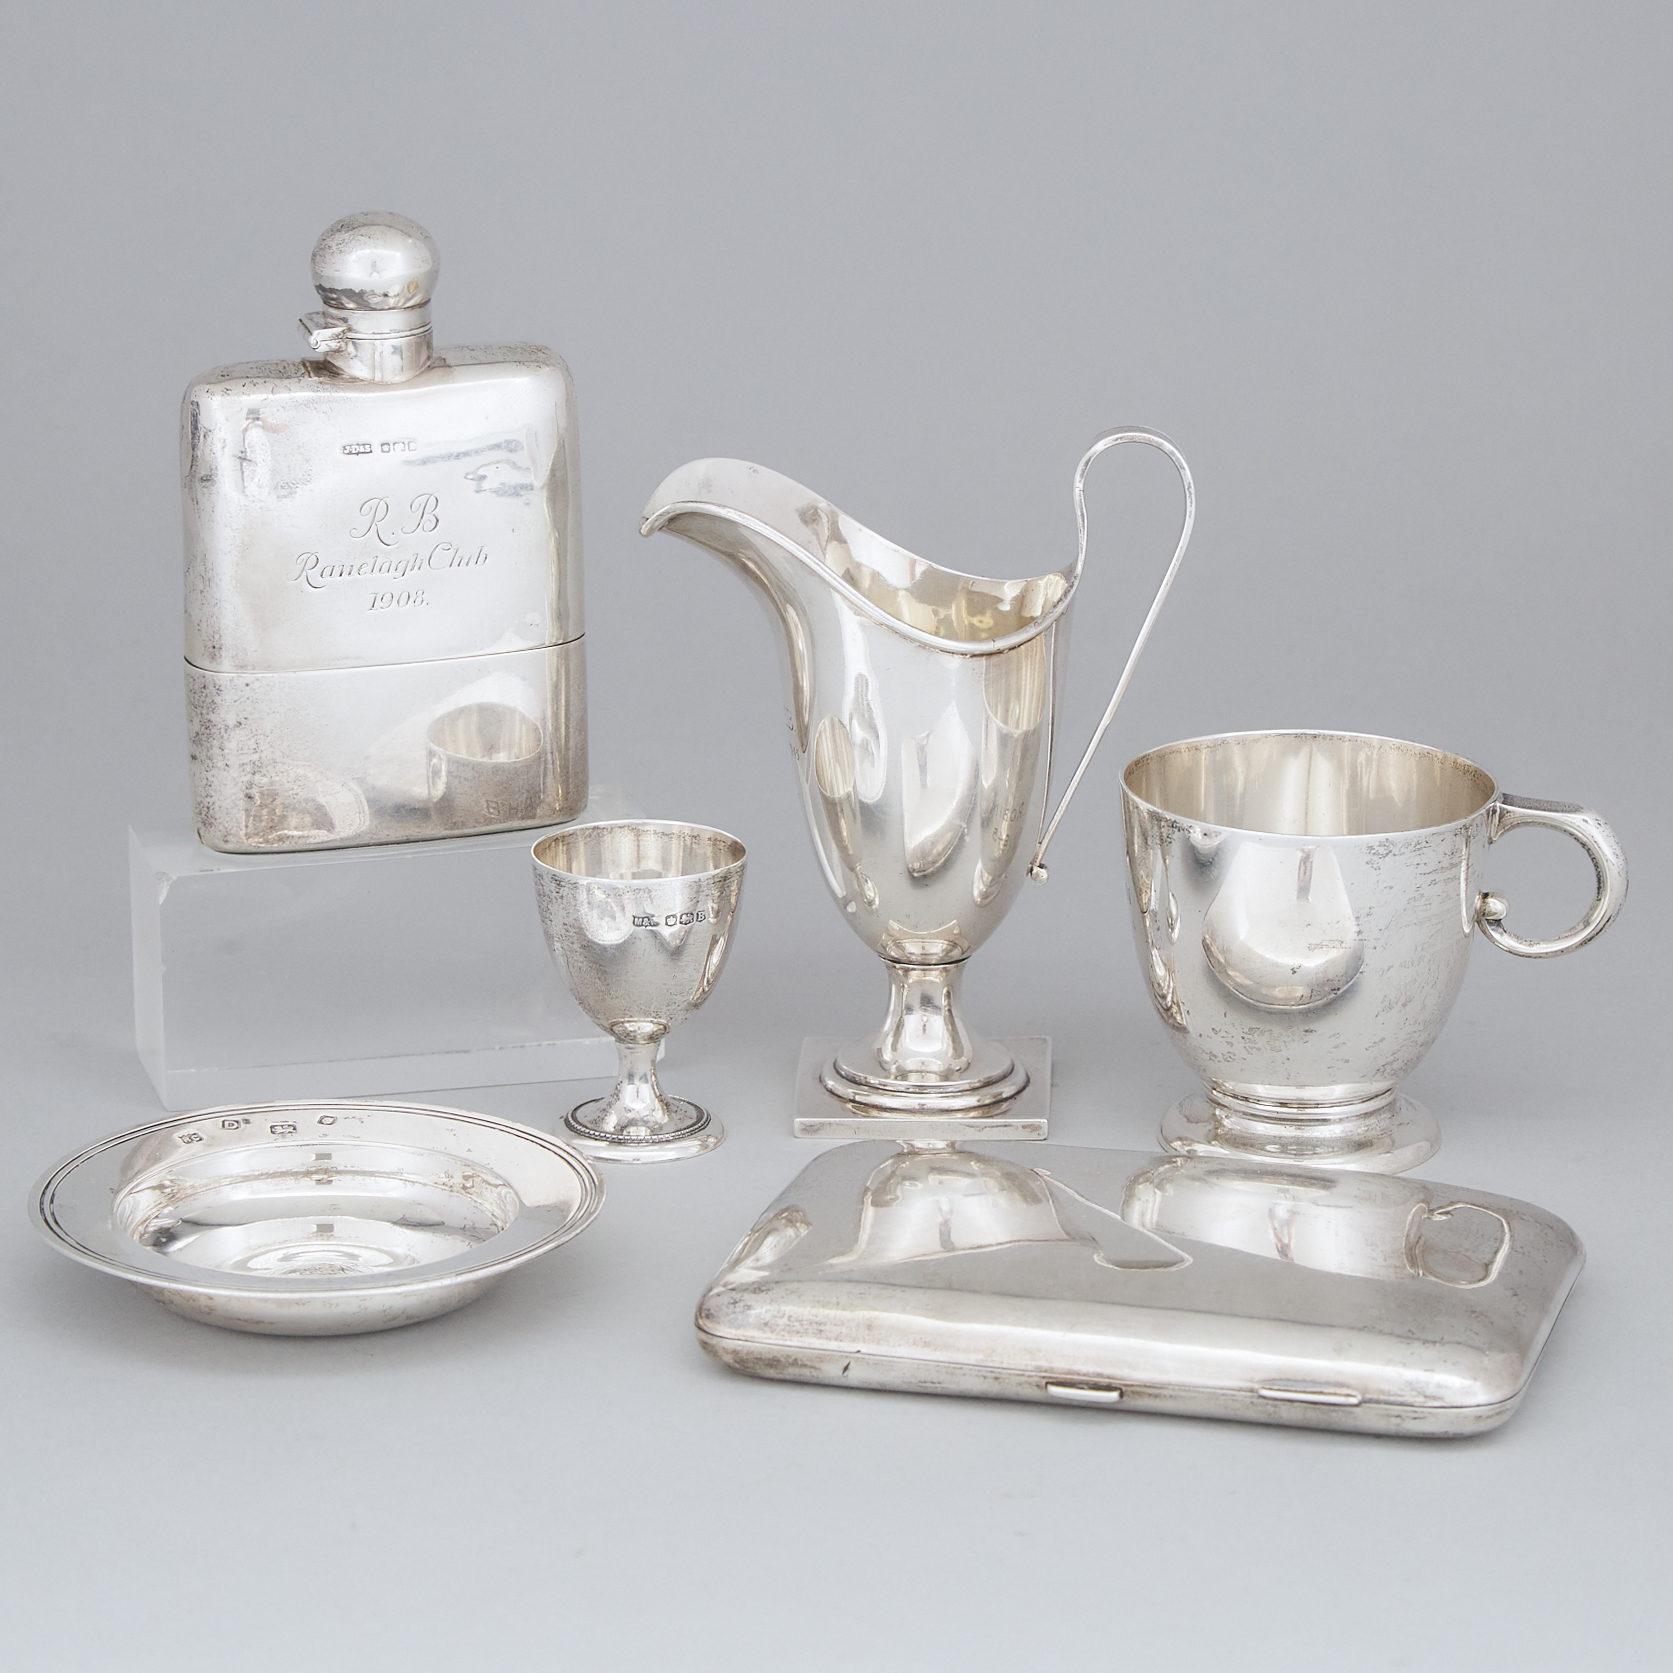 Group of Edwardian and Later English Silver, c.1902-44